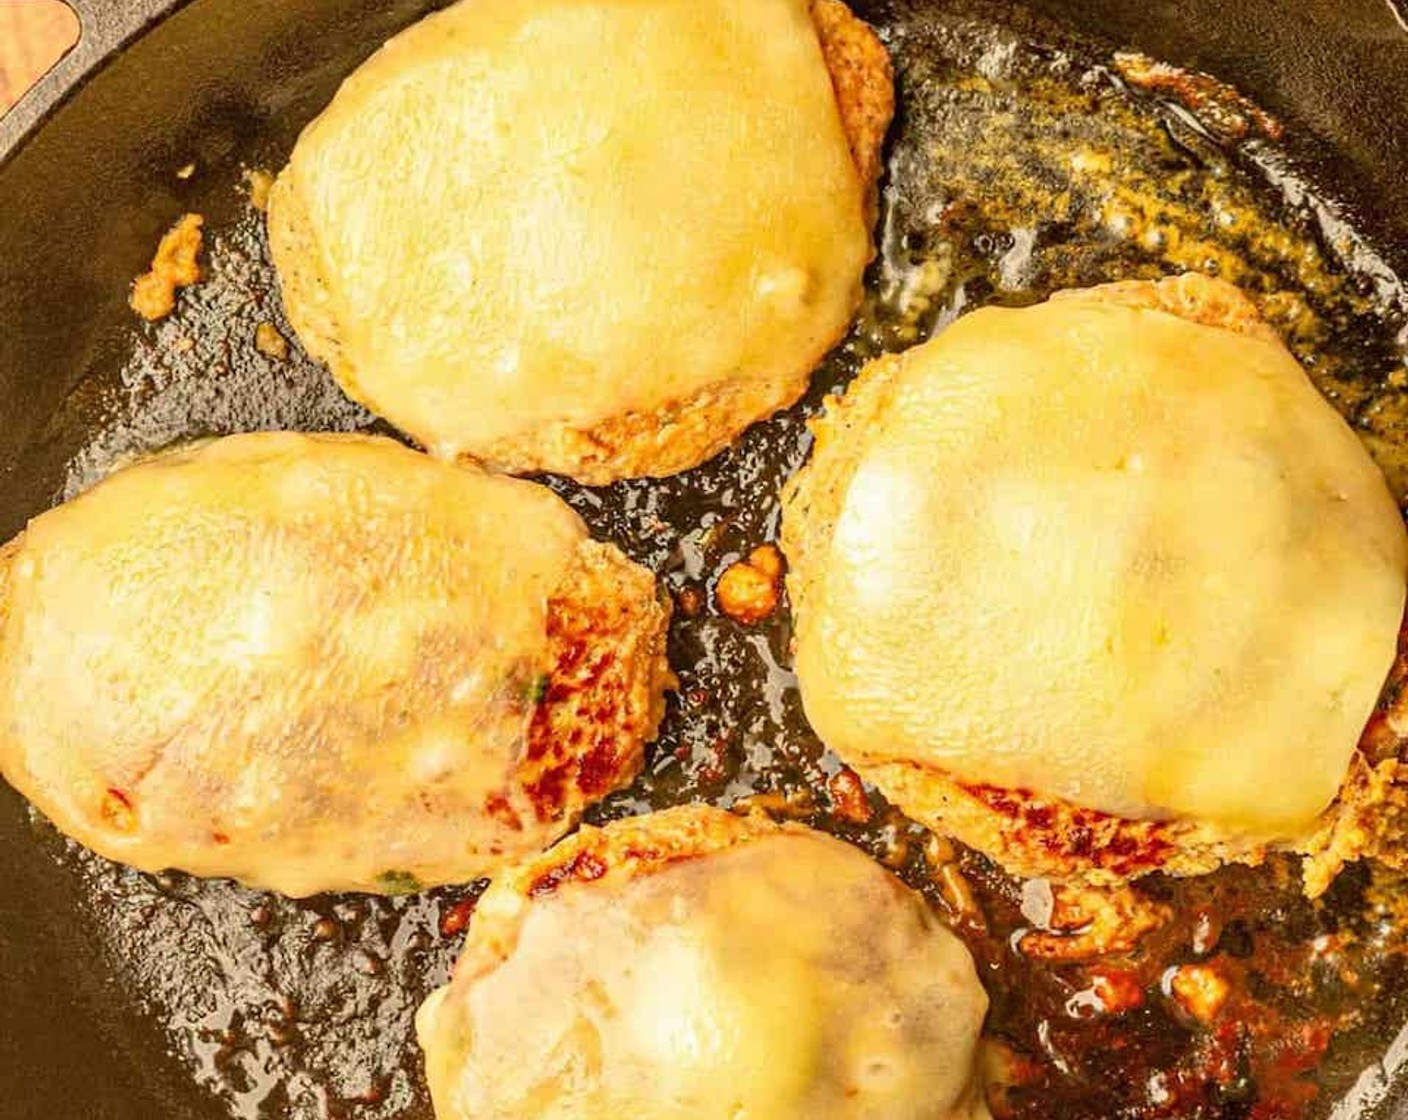 step 6 If you are using cheese, add a slice of Cheddar Cheese (4 slices) to each burger about 1 minute before they are done cooking. The internal temperature of the burgers should be at least 165 degrees F (70 degrees C).